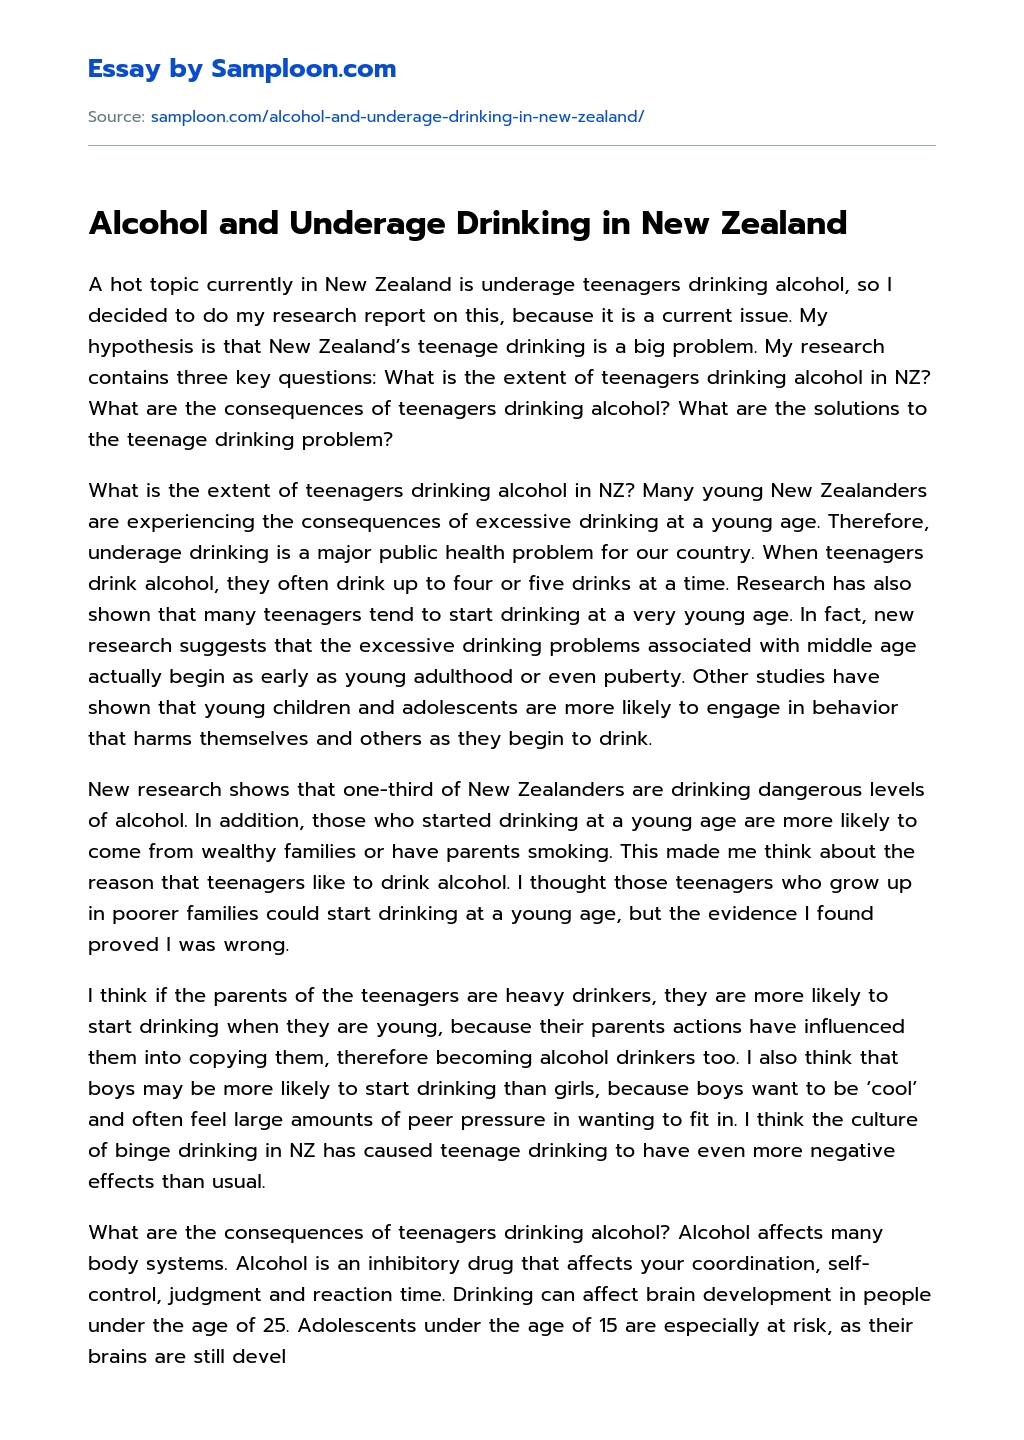 Alcohol and Underage Drinking in New Zealand Research Paper essay